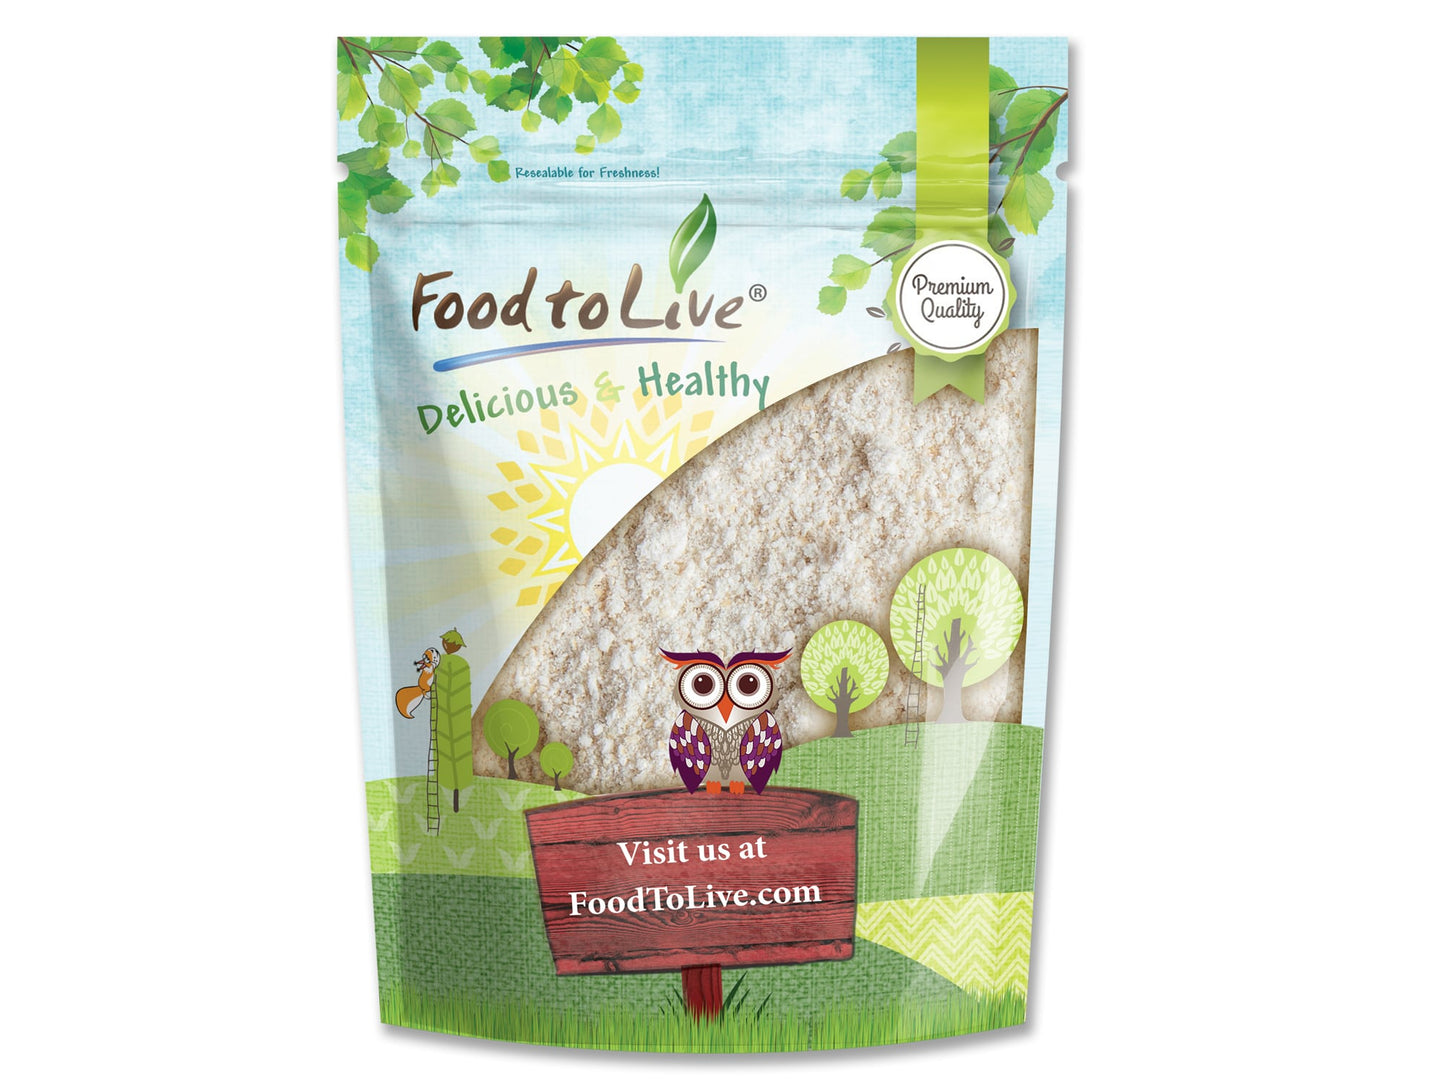 Whole Grain Oat Flour – Finely Ground from Whole Grain Oat Groats, Vegan, Bulk. Rich in Fiber, Protein. Perfect for Flour Blends. Great for Baking Muffins, Fluffy Cakes, Bread, and Pancakes